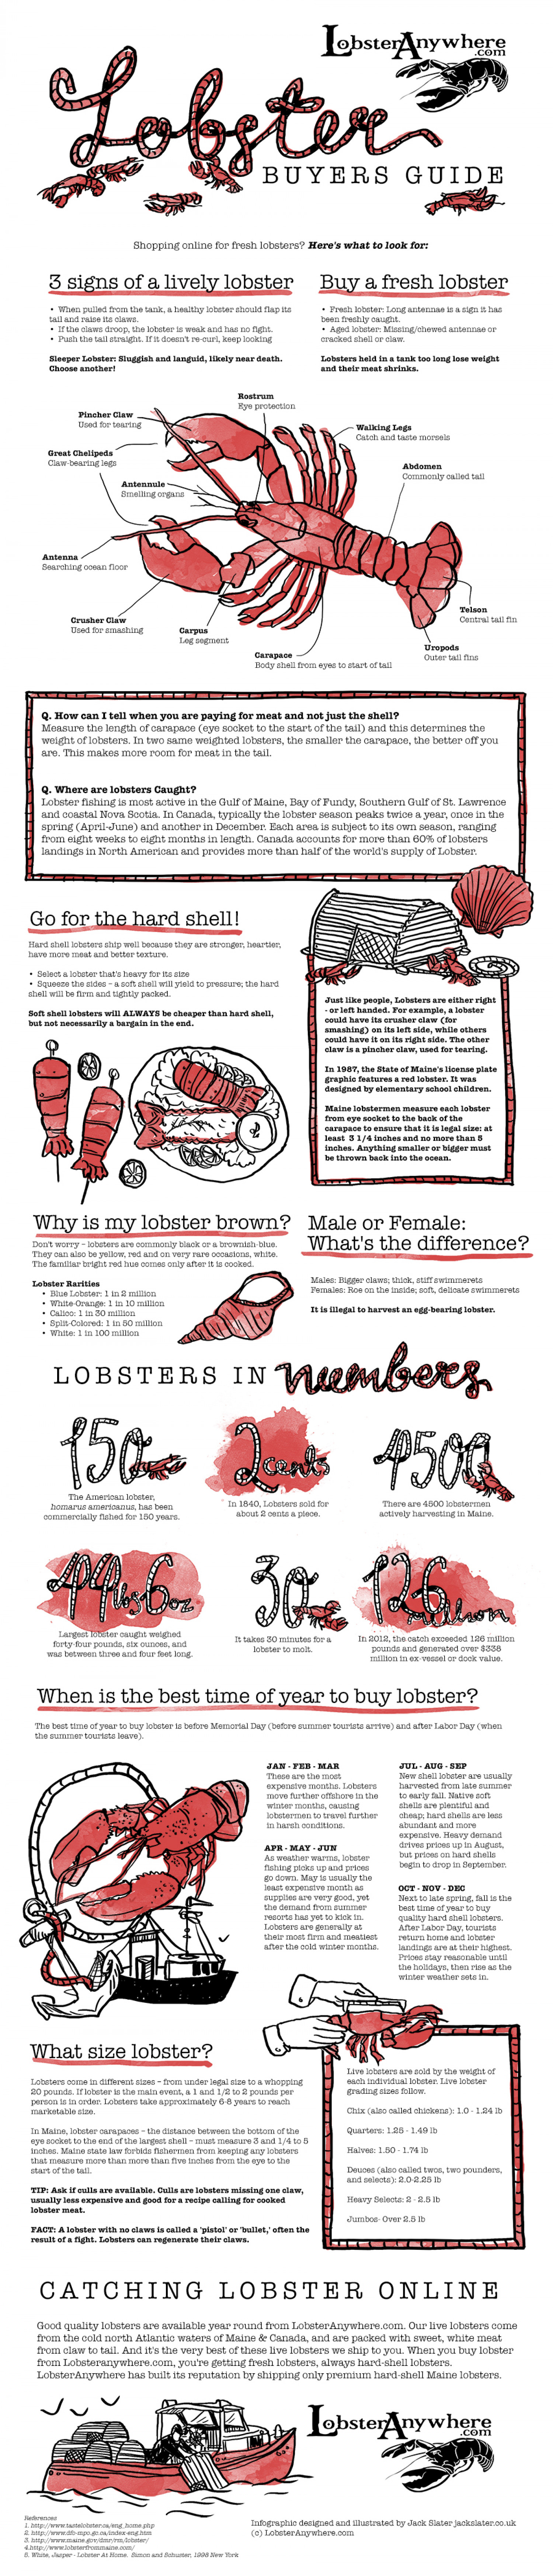 The Complete Guide for Buying a Fresh Lobster